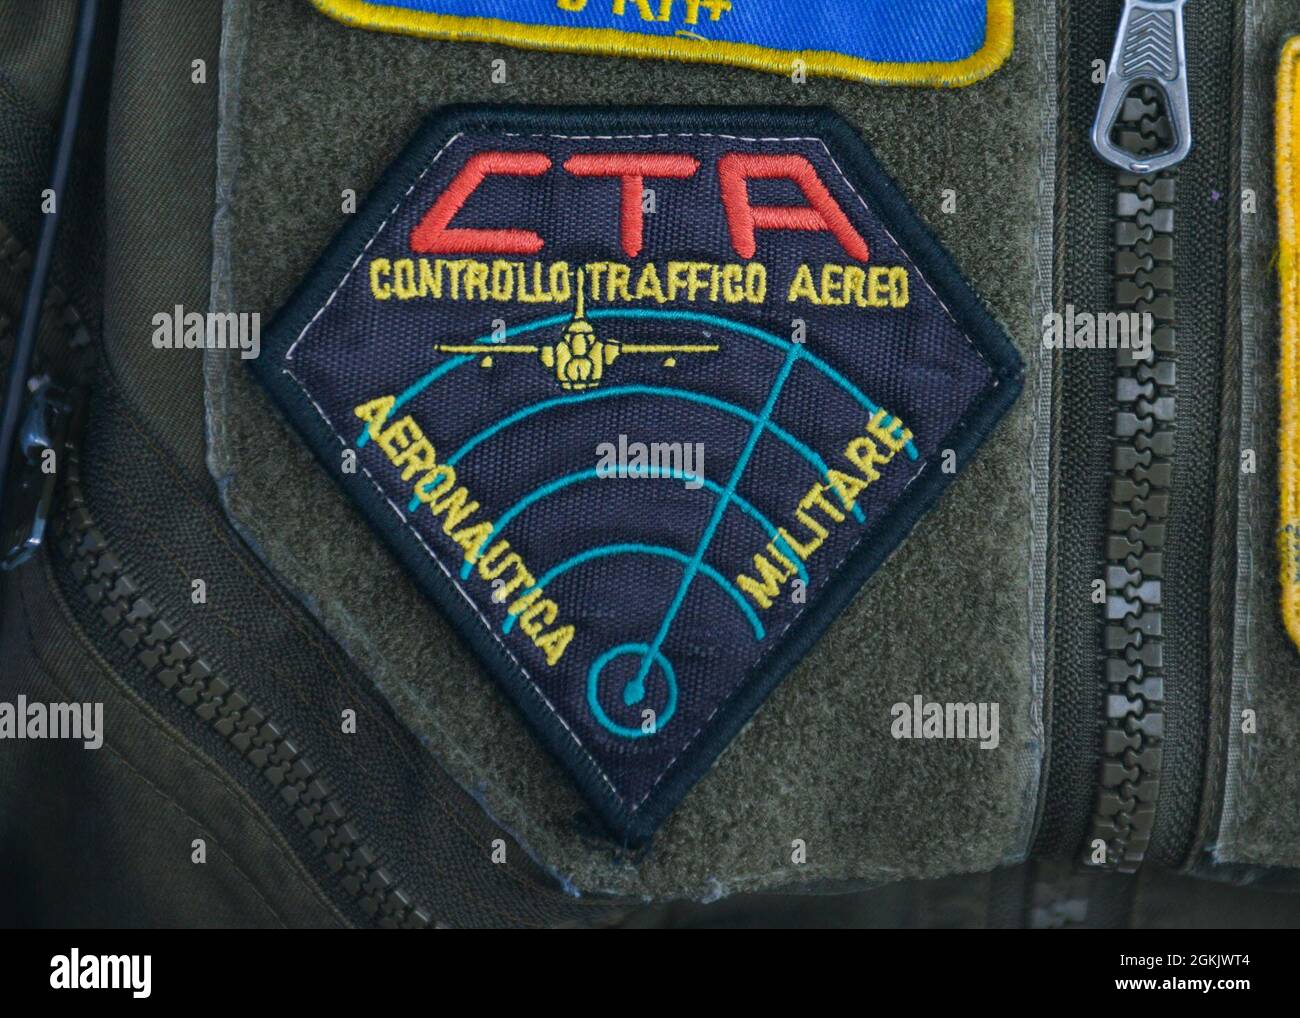 An Italian air force Servizio CSA, Air Traffic Control Service, air traffic controller (ATC), patch is shown at Aviano Air Base, Italy, May 7, 2021. The U.S. Air Force and ITAF ATCs work together to relay flight and landing instructions, weather updates, and safety information to pilots. The ATCs maneuver U.S. Air Force and ITAF F-16 Fighting Falcon and HH-60 Pave Hawk aircraft on the flight line and in the airspace 24-hours per day, seven days per week. Stock Photo